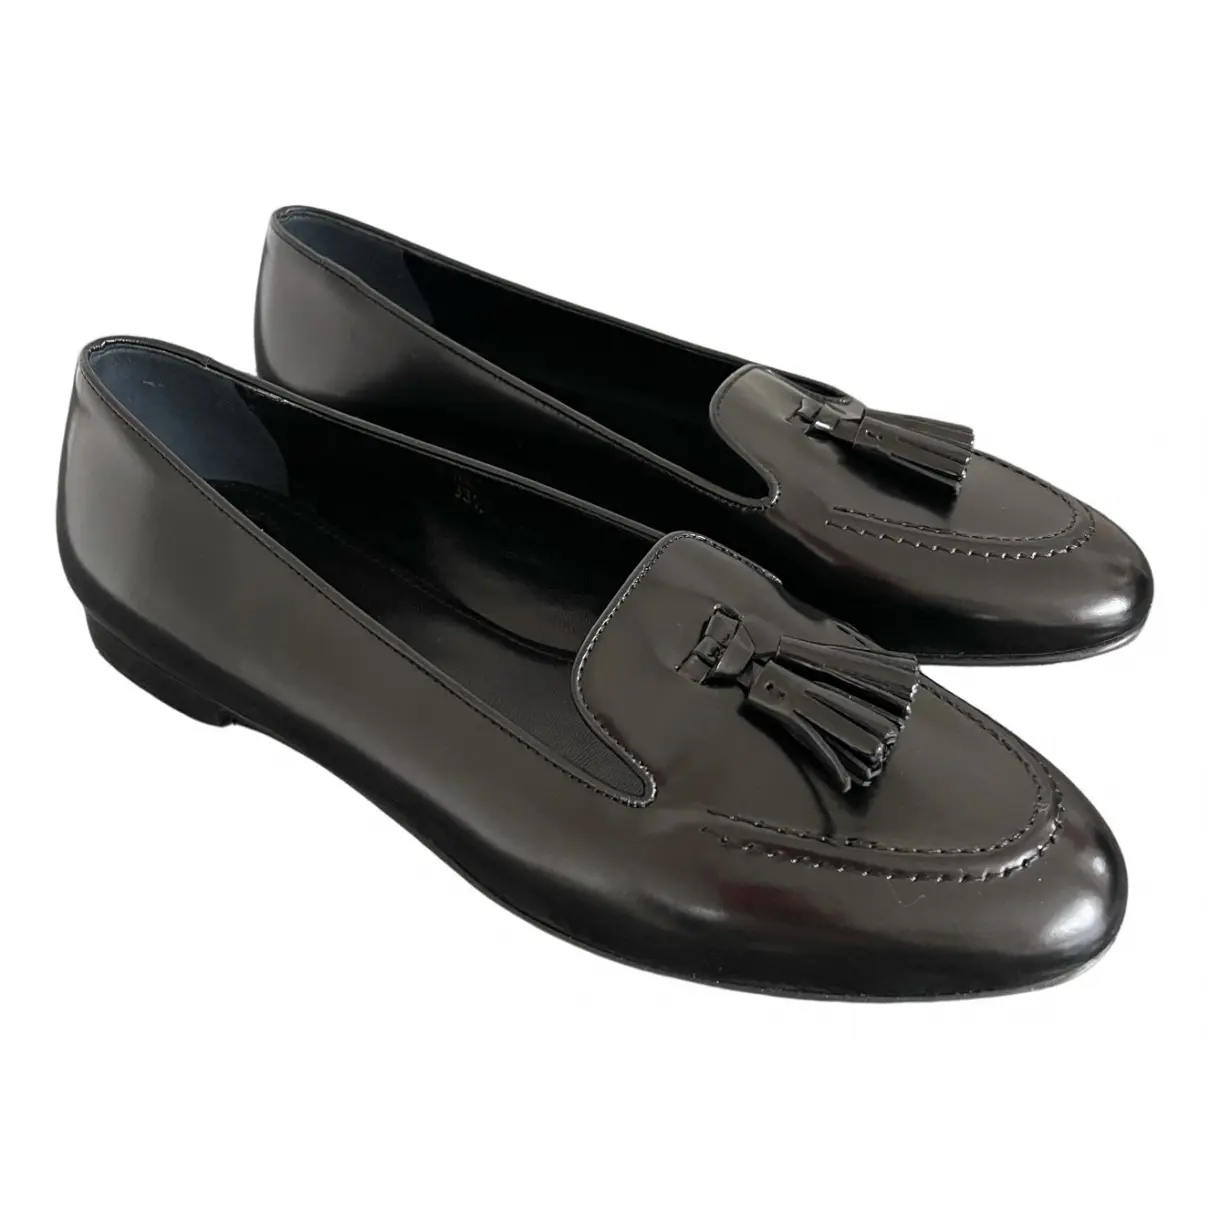 Patent leather flats Church's